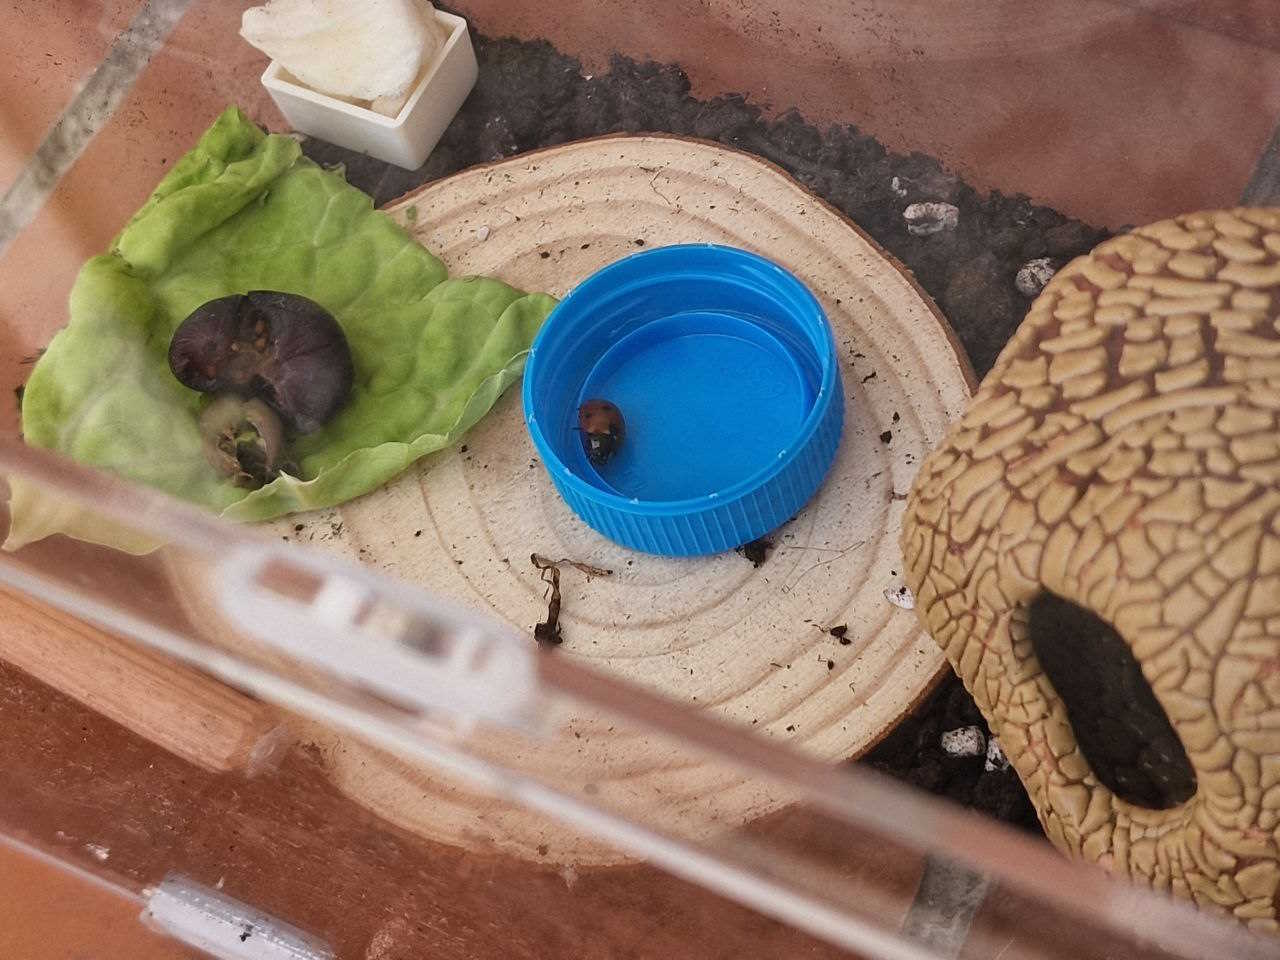 Picture of the real life Keta inside her transparent cage. You can see the dirt, some lettuce, watered-down honey in a wet paper, some wooden decoration, her small skull-like ceramic house and a small bottle with her inside, taking a great nap after eating lots of aphids.